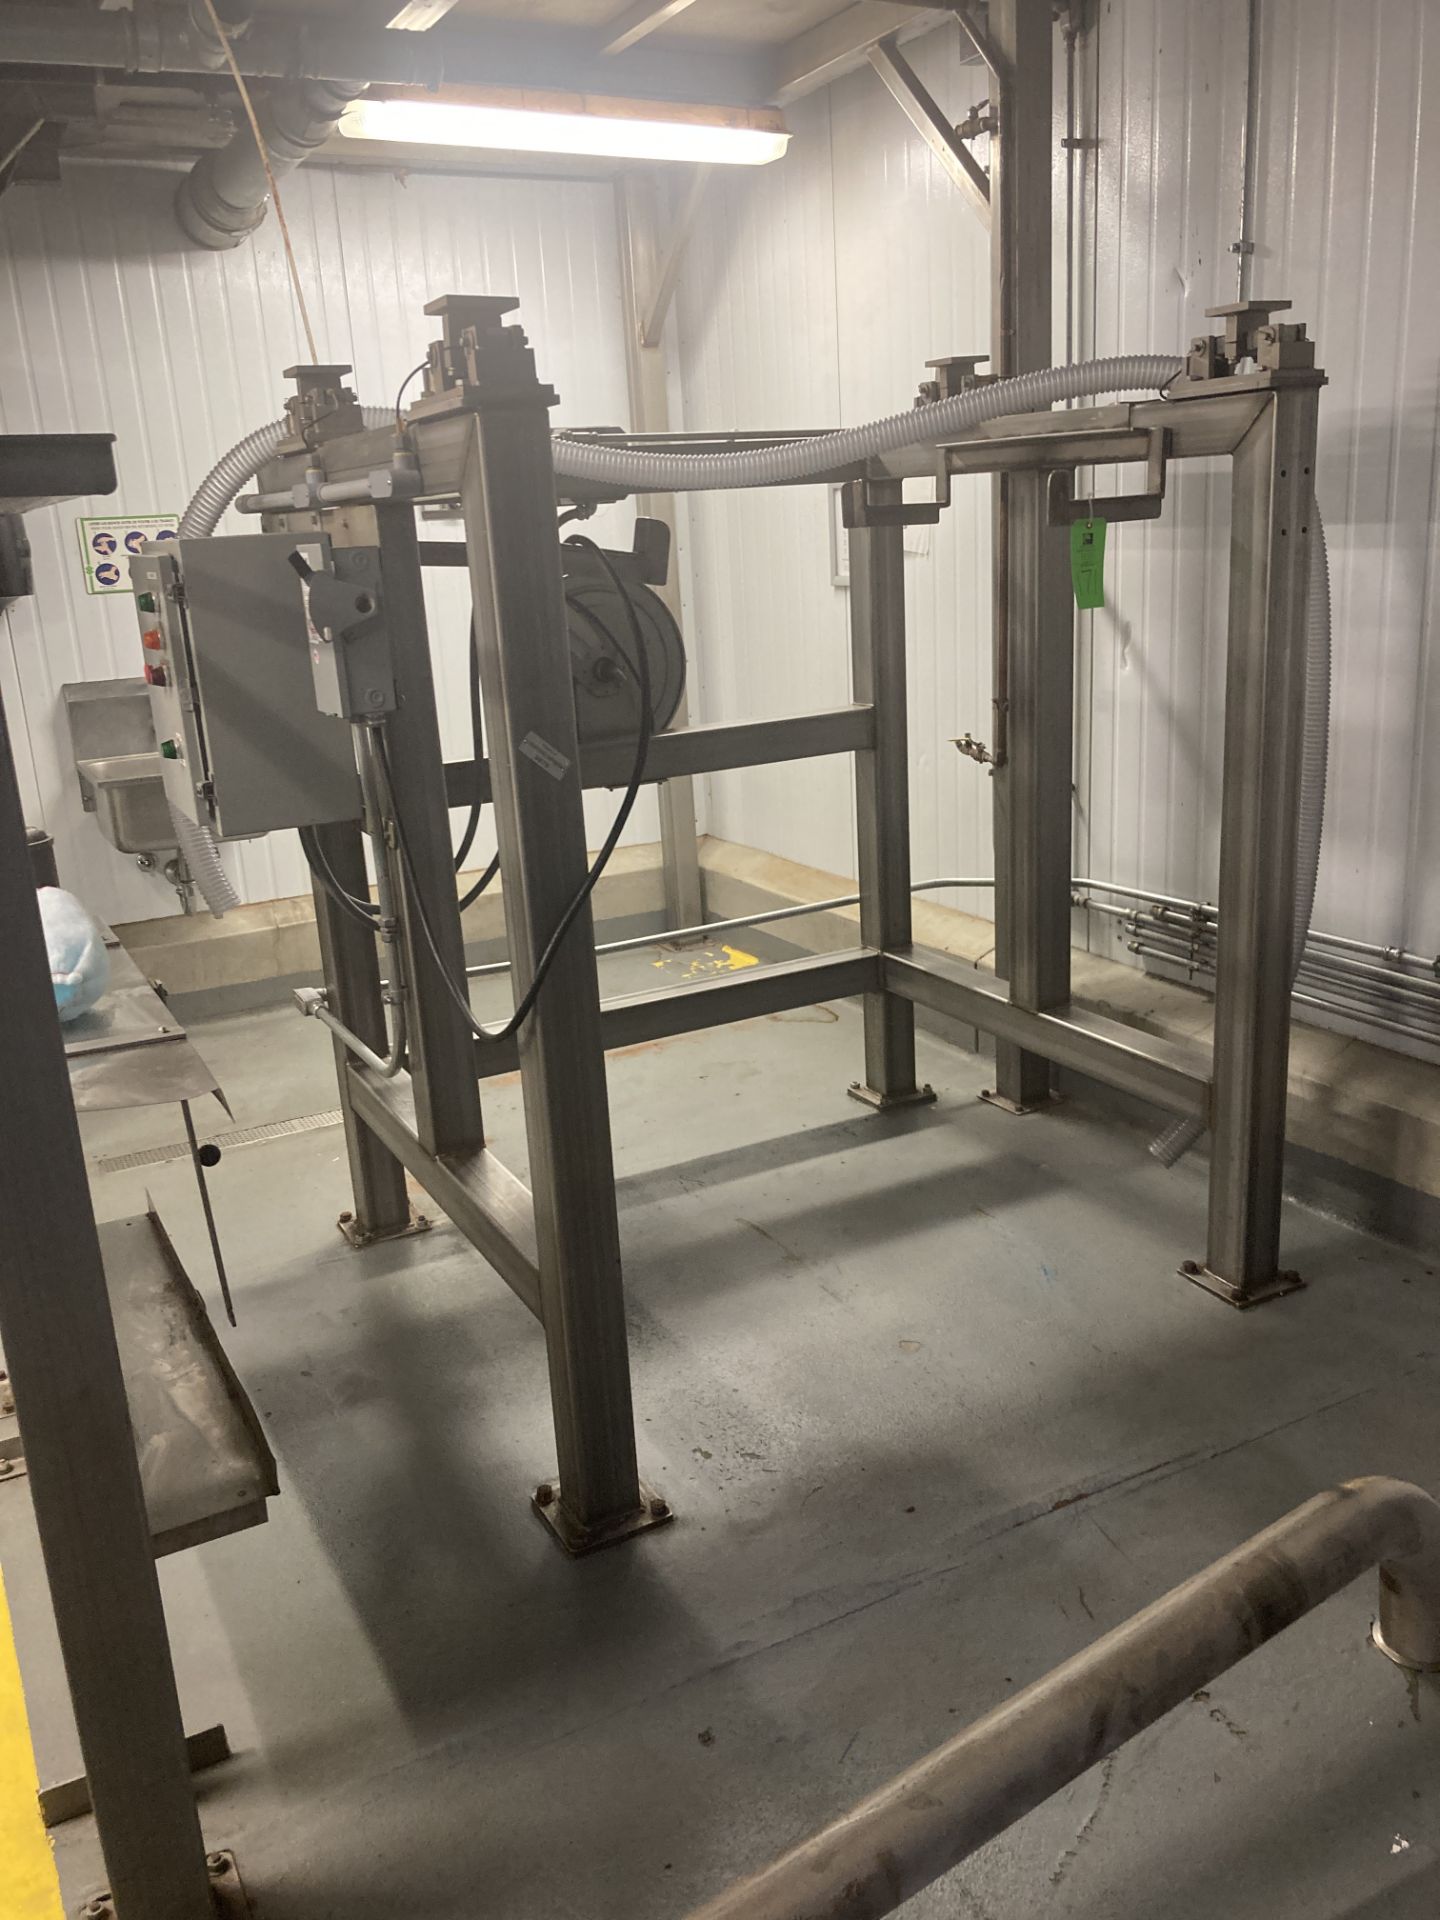 Stainless structure with Mettler Toledo load cell system, 60 in x 38 in Rigging Fee: $ 425 - Image 2 of 3